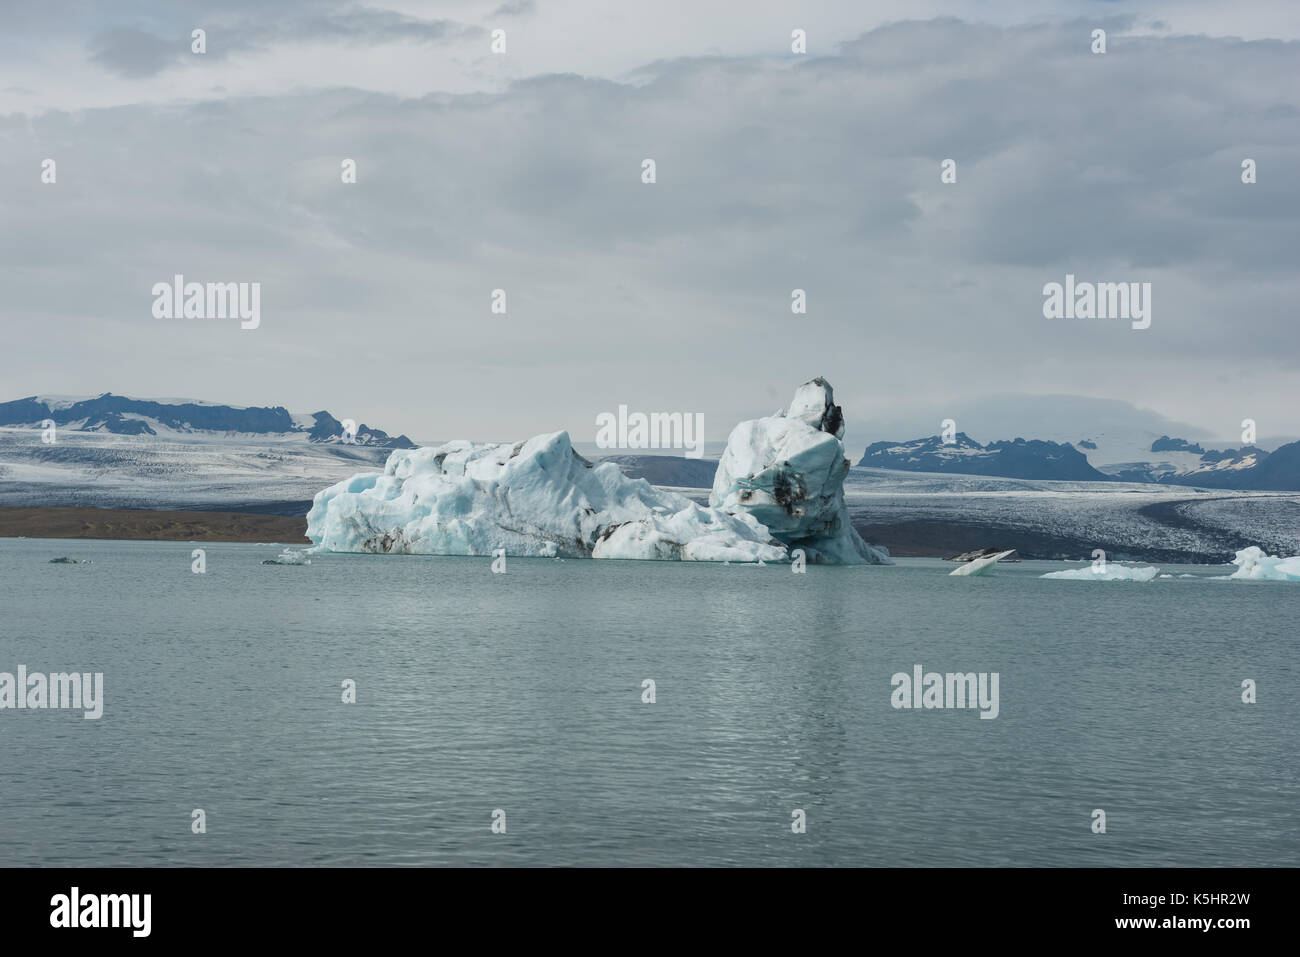 Icebergs floating in a glacial lagoon in front of melting glacier Stock Photo